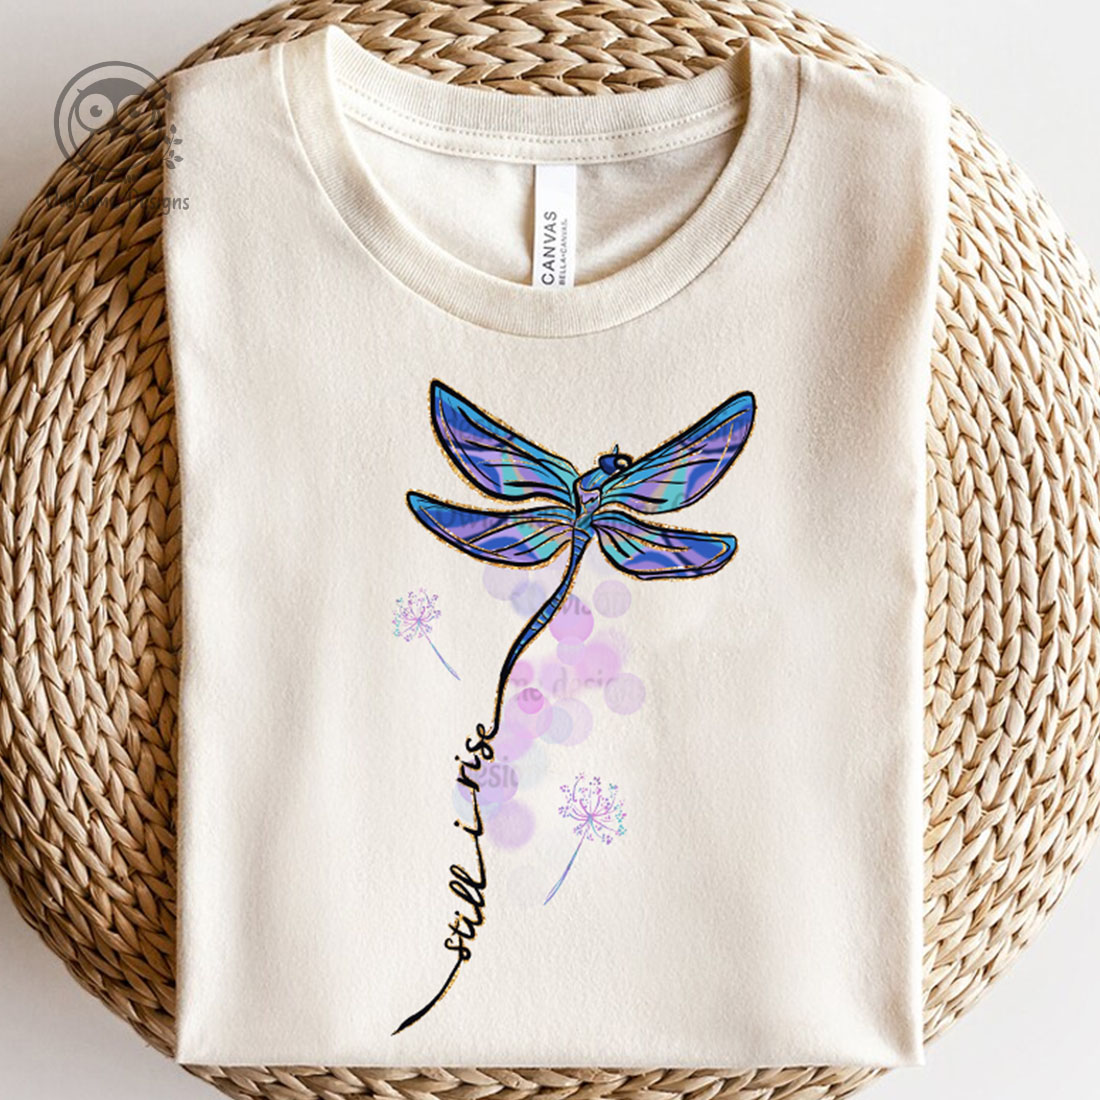 Image of a t-shirt with wonderful dragonfly print and lettering.